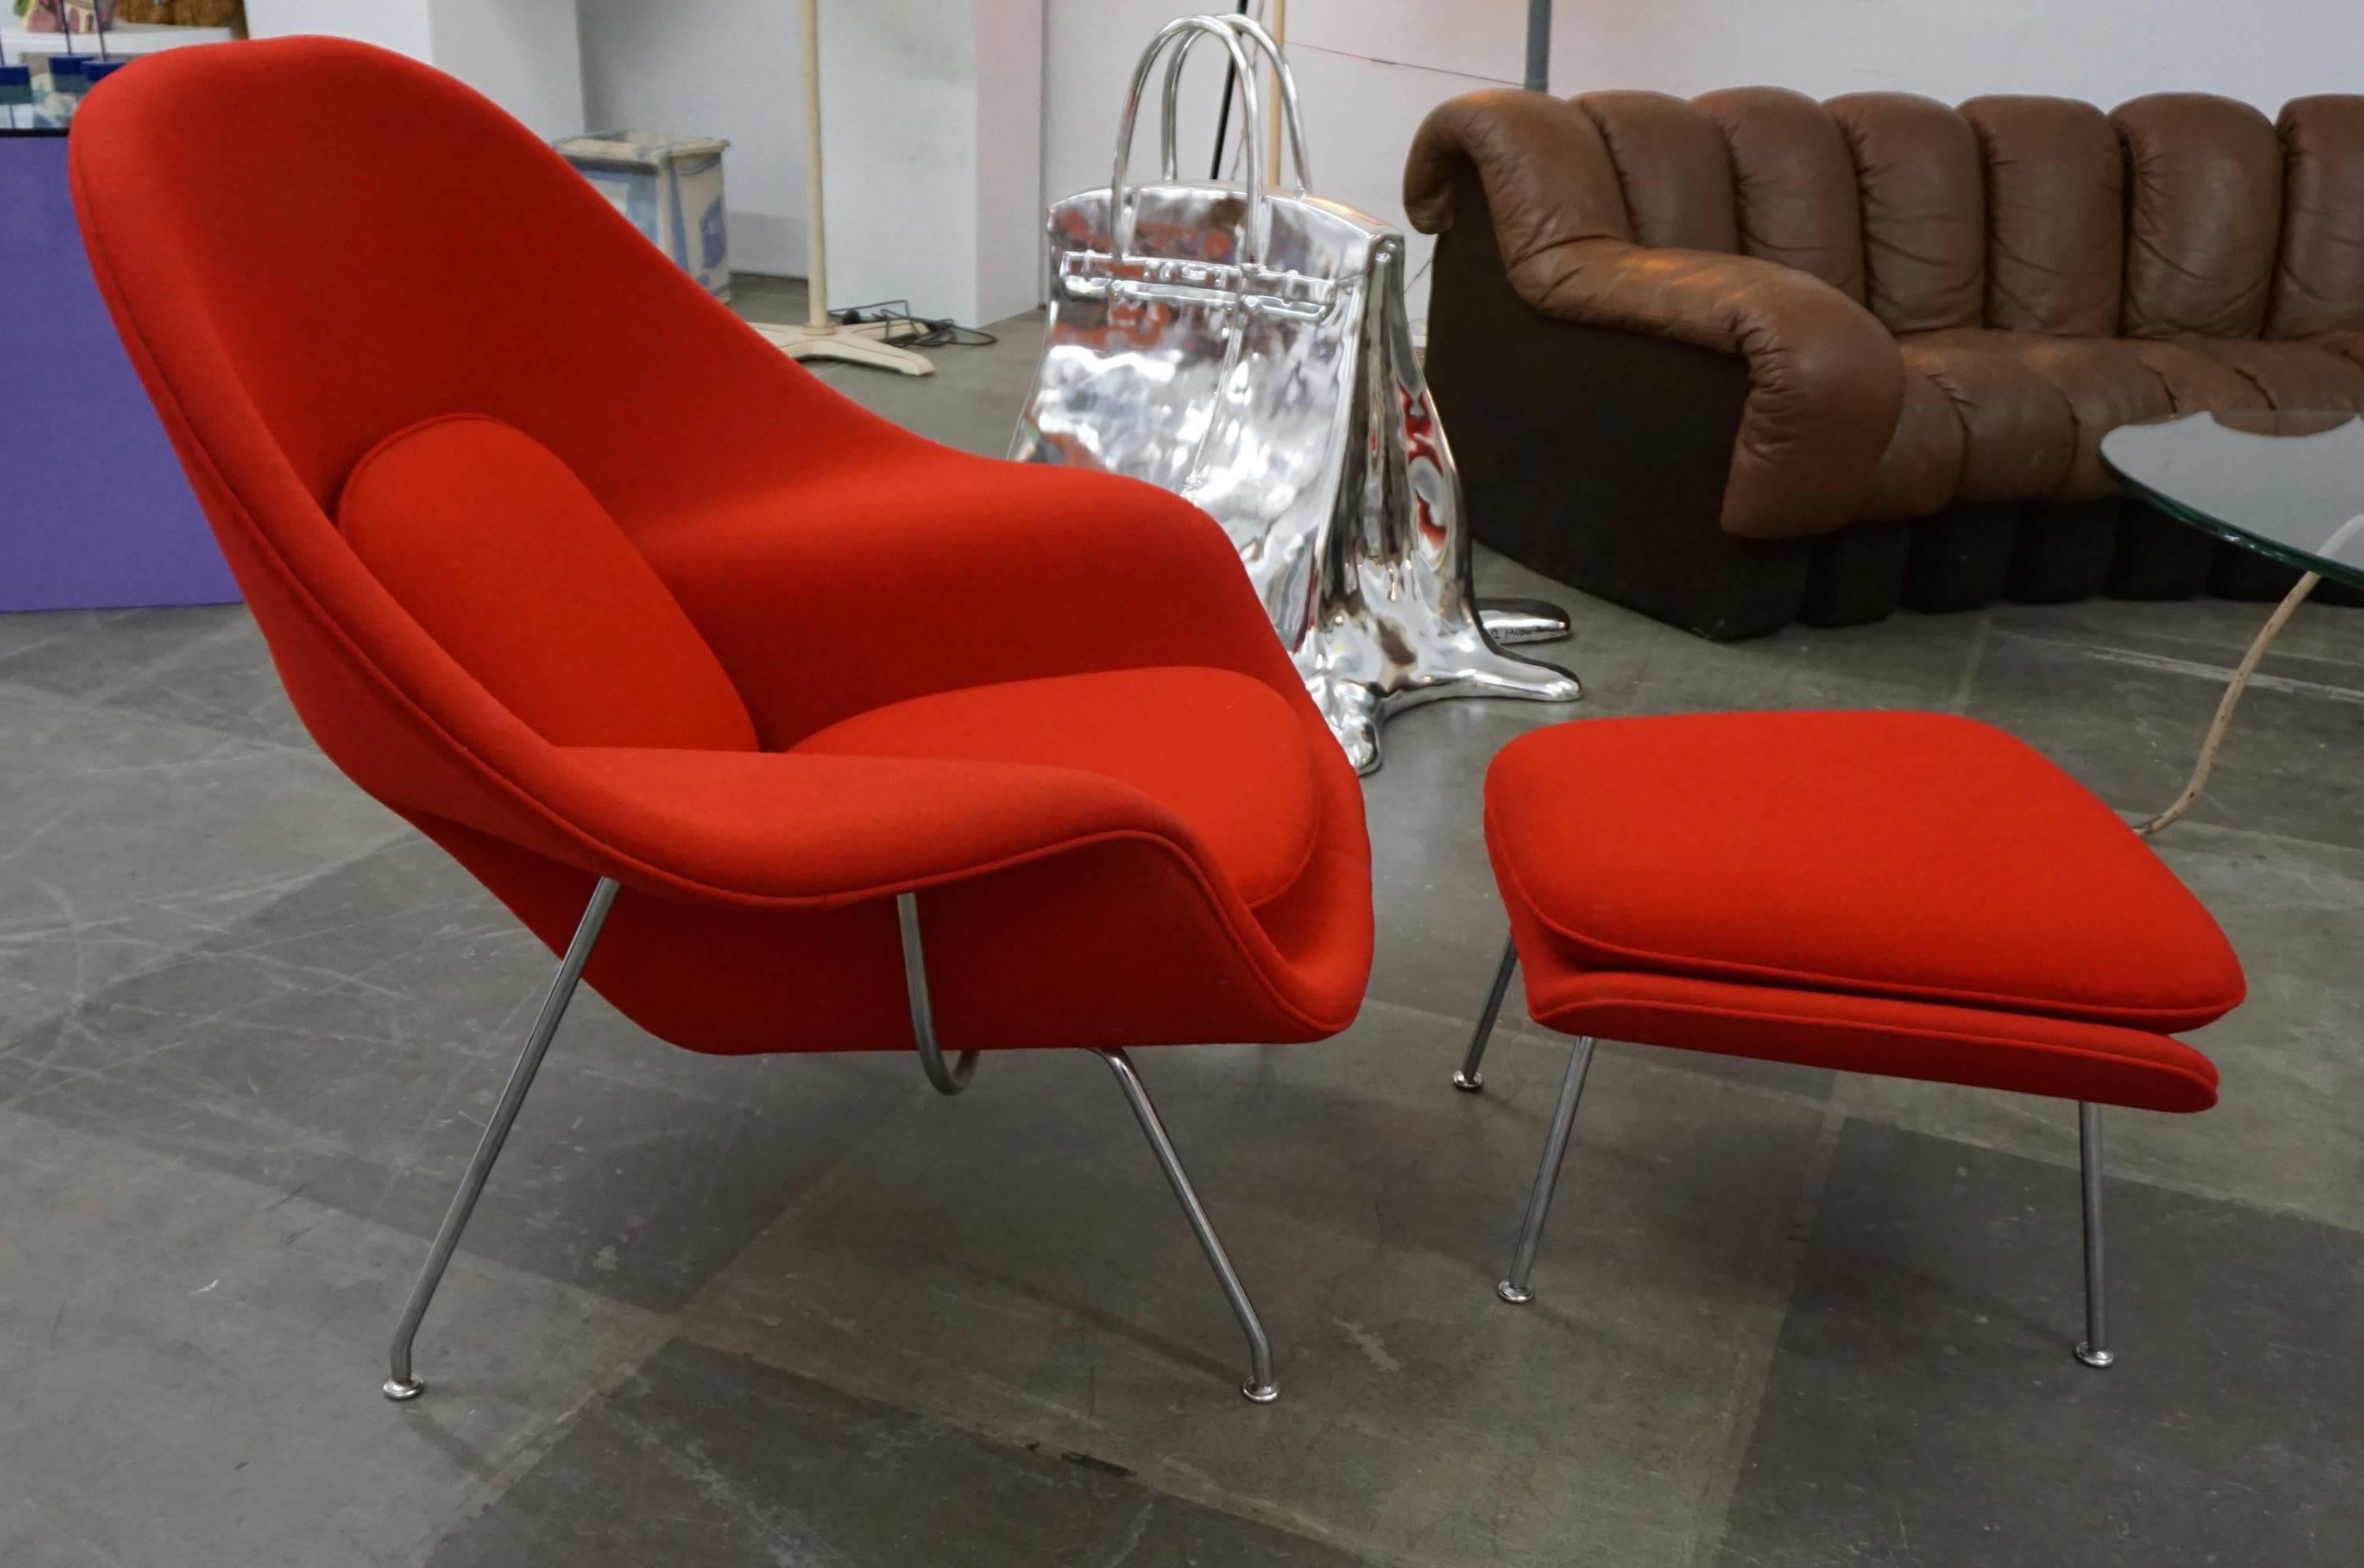 Designed by Saarinen for Knoll Intl. Upholstered in red wool Knoll fabric with chrome-plated legs.
Three available, purple, red and black.